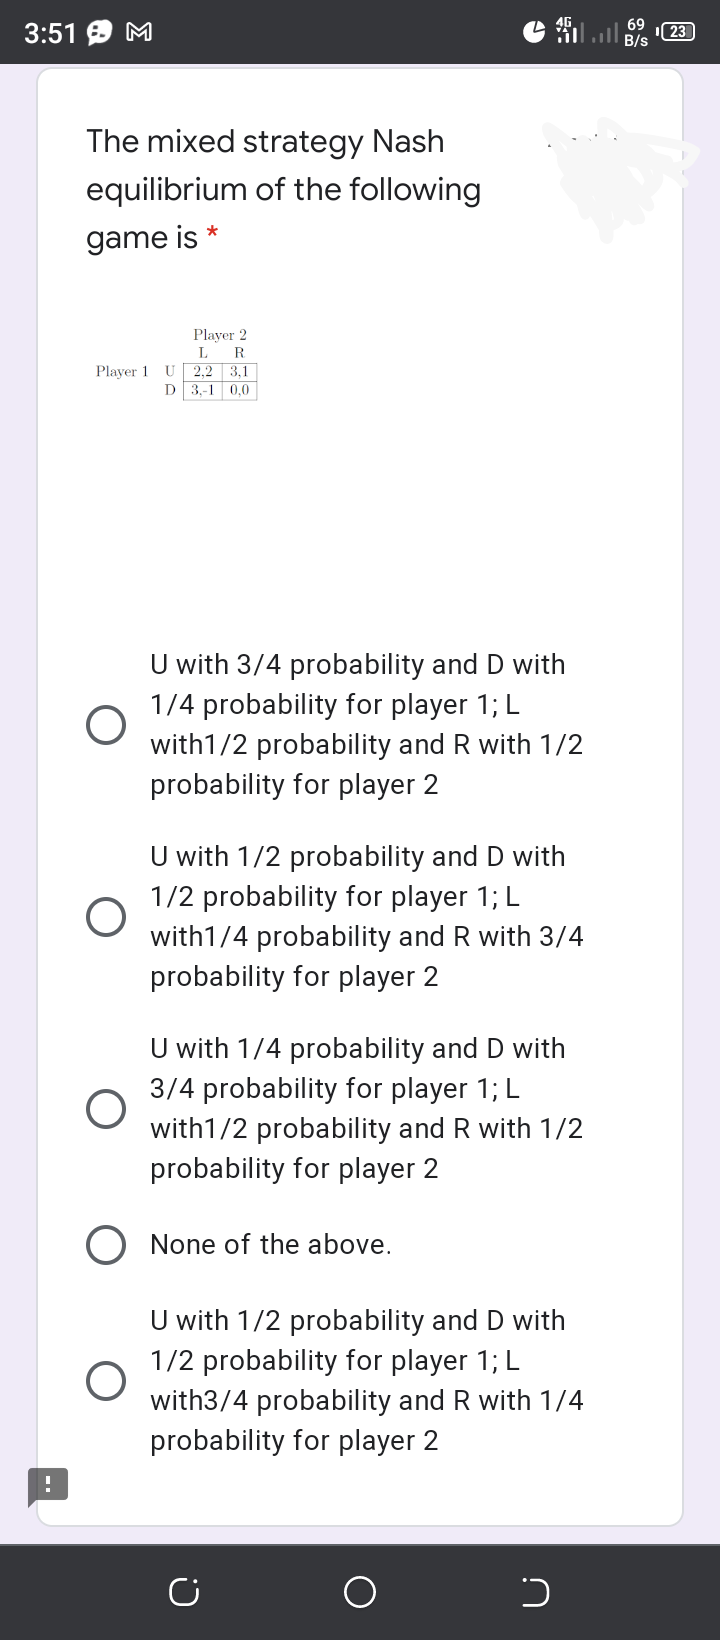 3:51 9 M
23
The mixed strategy Nash
equilibrium of the following
*
game is
Player 2
R.
L
Player 1 U 2,2 3,1
D 3.-1 0.0
U with 3/4 probability and D with
1/4 probability for player 1; L
with1/2 probability and
probability for player 2
with 1/2
U with 1/2 probability and D with
1/2 probability for player 1; L
with1/4 probability and R with 3/4
probability for player 2
U with 1/4 probability and D with
3/4 probability for player 1; L
with1/2 probability and R with 1/2
probability for player 2
O None of the above.
U with 1/2 probability and D with
1/2 probability for player 1; L
with3/4 probability and R with 1/4
probability for player 2
